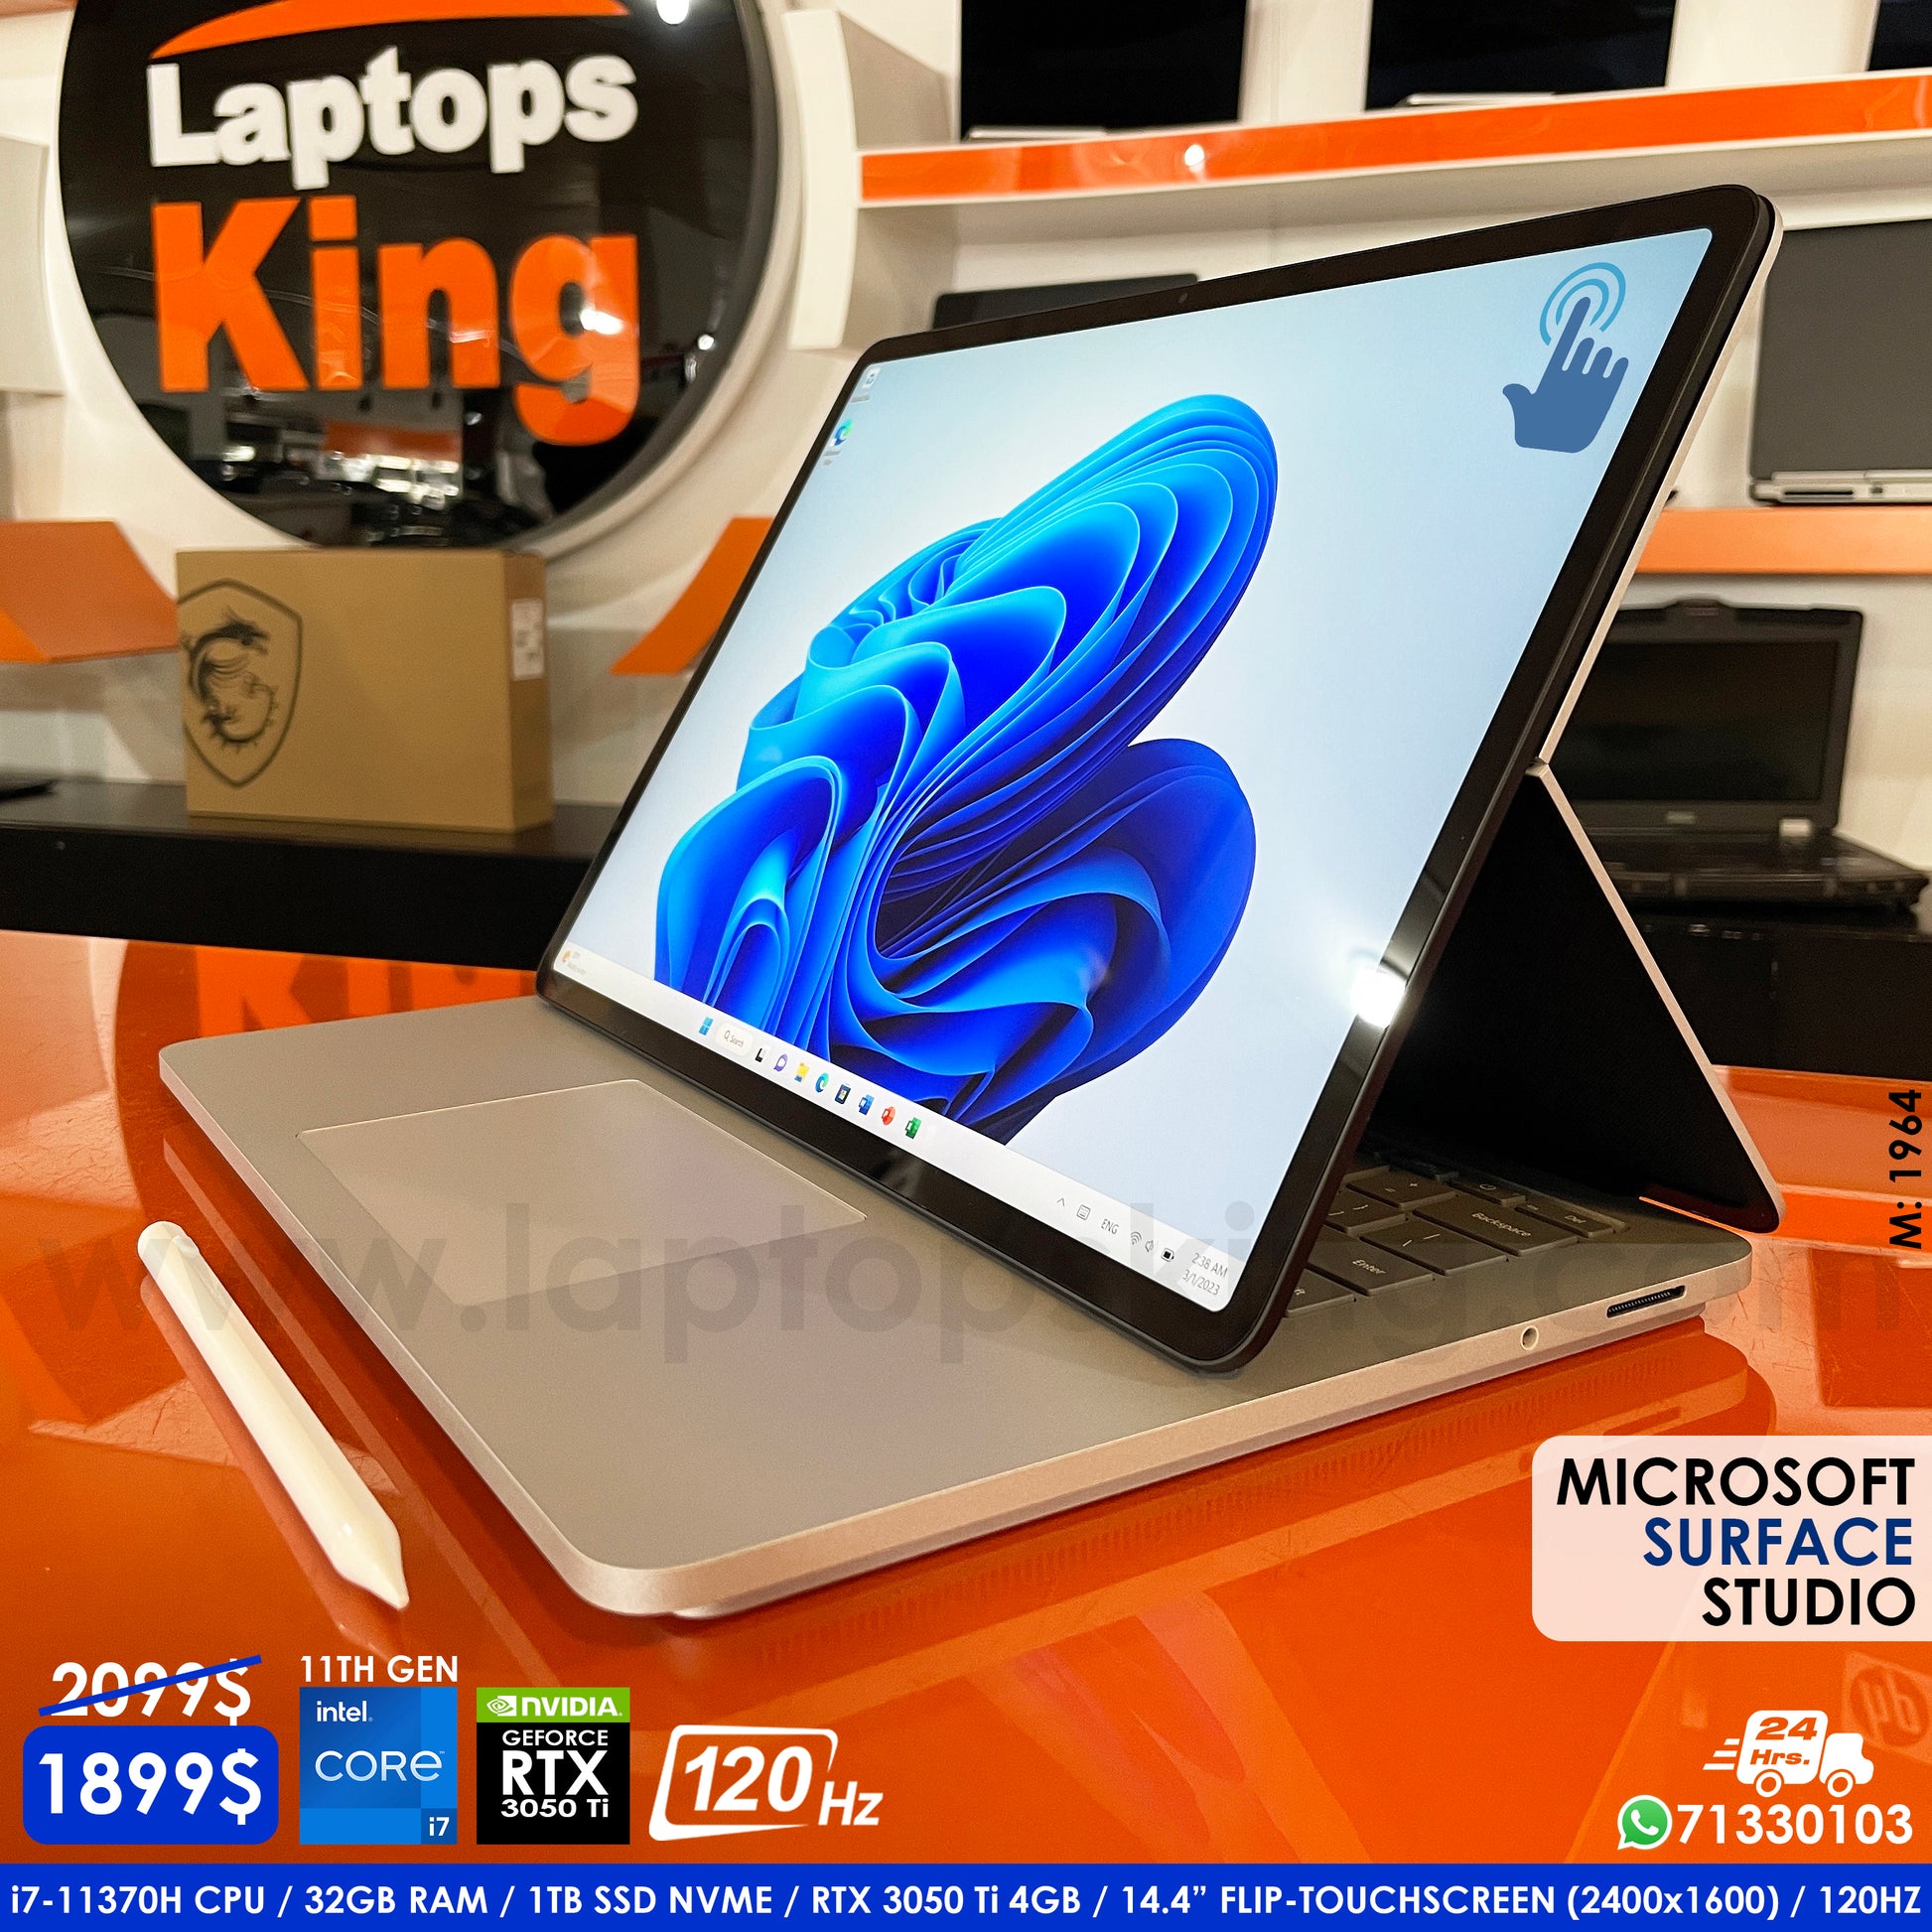 Microsoft Surface Studio i7-11370h Rtx 3050 Ti 120hz Res. 2400x1600 Touch 2in1 Laptop (Brand New) Gaming laptop, Graphic Design laptop, best laptop for gaming, best laptop for graphic design, computer for sale Lebanon, laptop for video editing in Lebanon, laptop for sale Lebanon, best graphic design laptop,	best video editing laptop, best programming laptop, laptop for sale in Lebanon, laptops for sale in Lebanon, laptop for sale in Lebanon, buy computer Lebanon, buy laptop Lebanon.